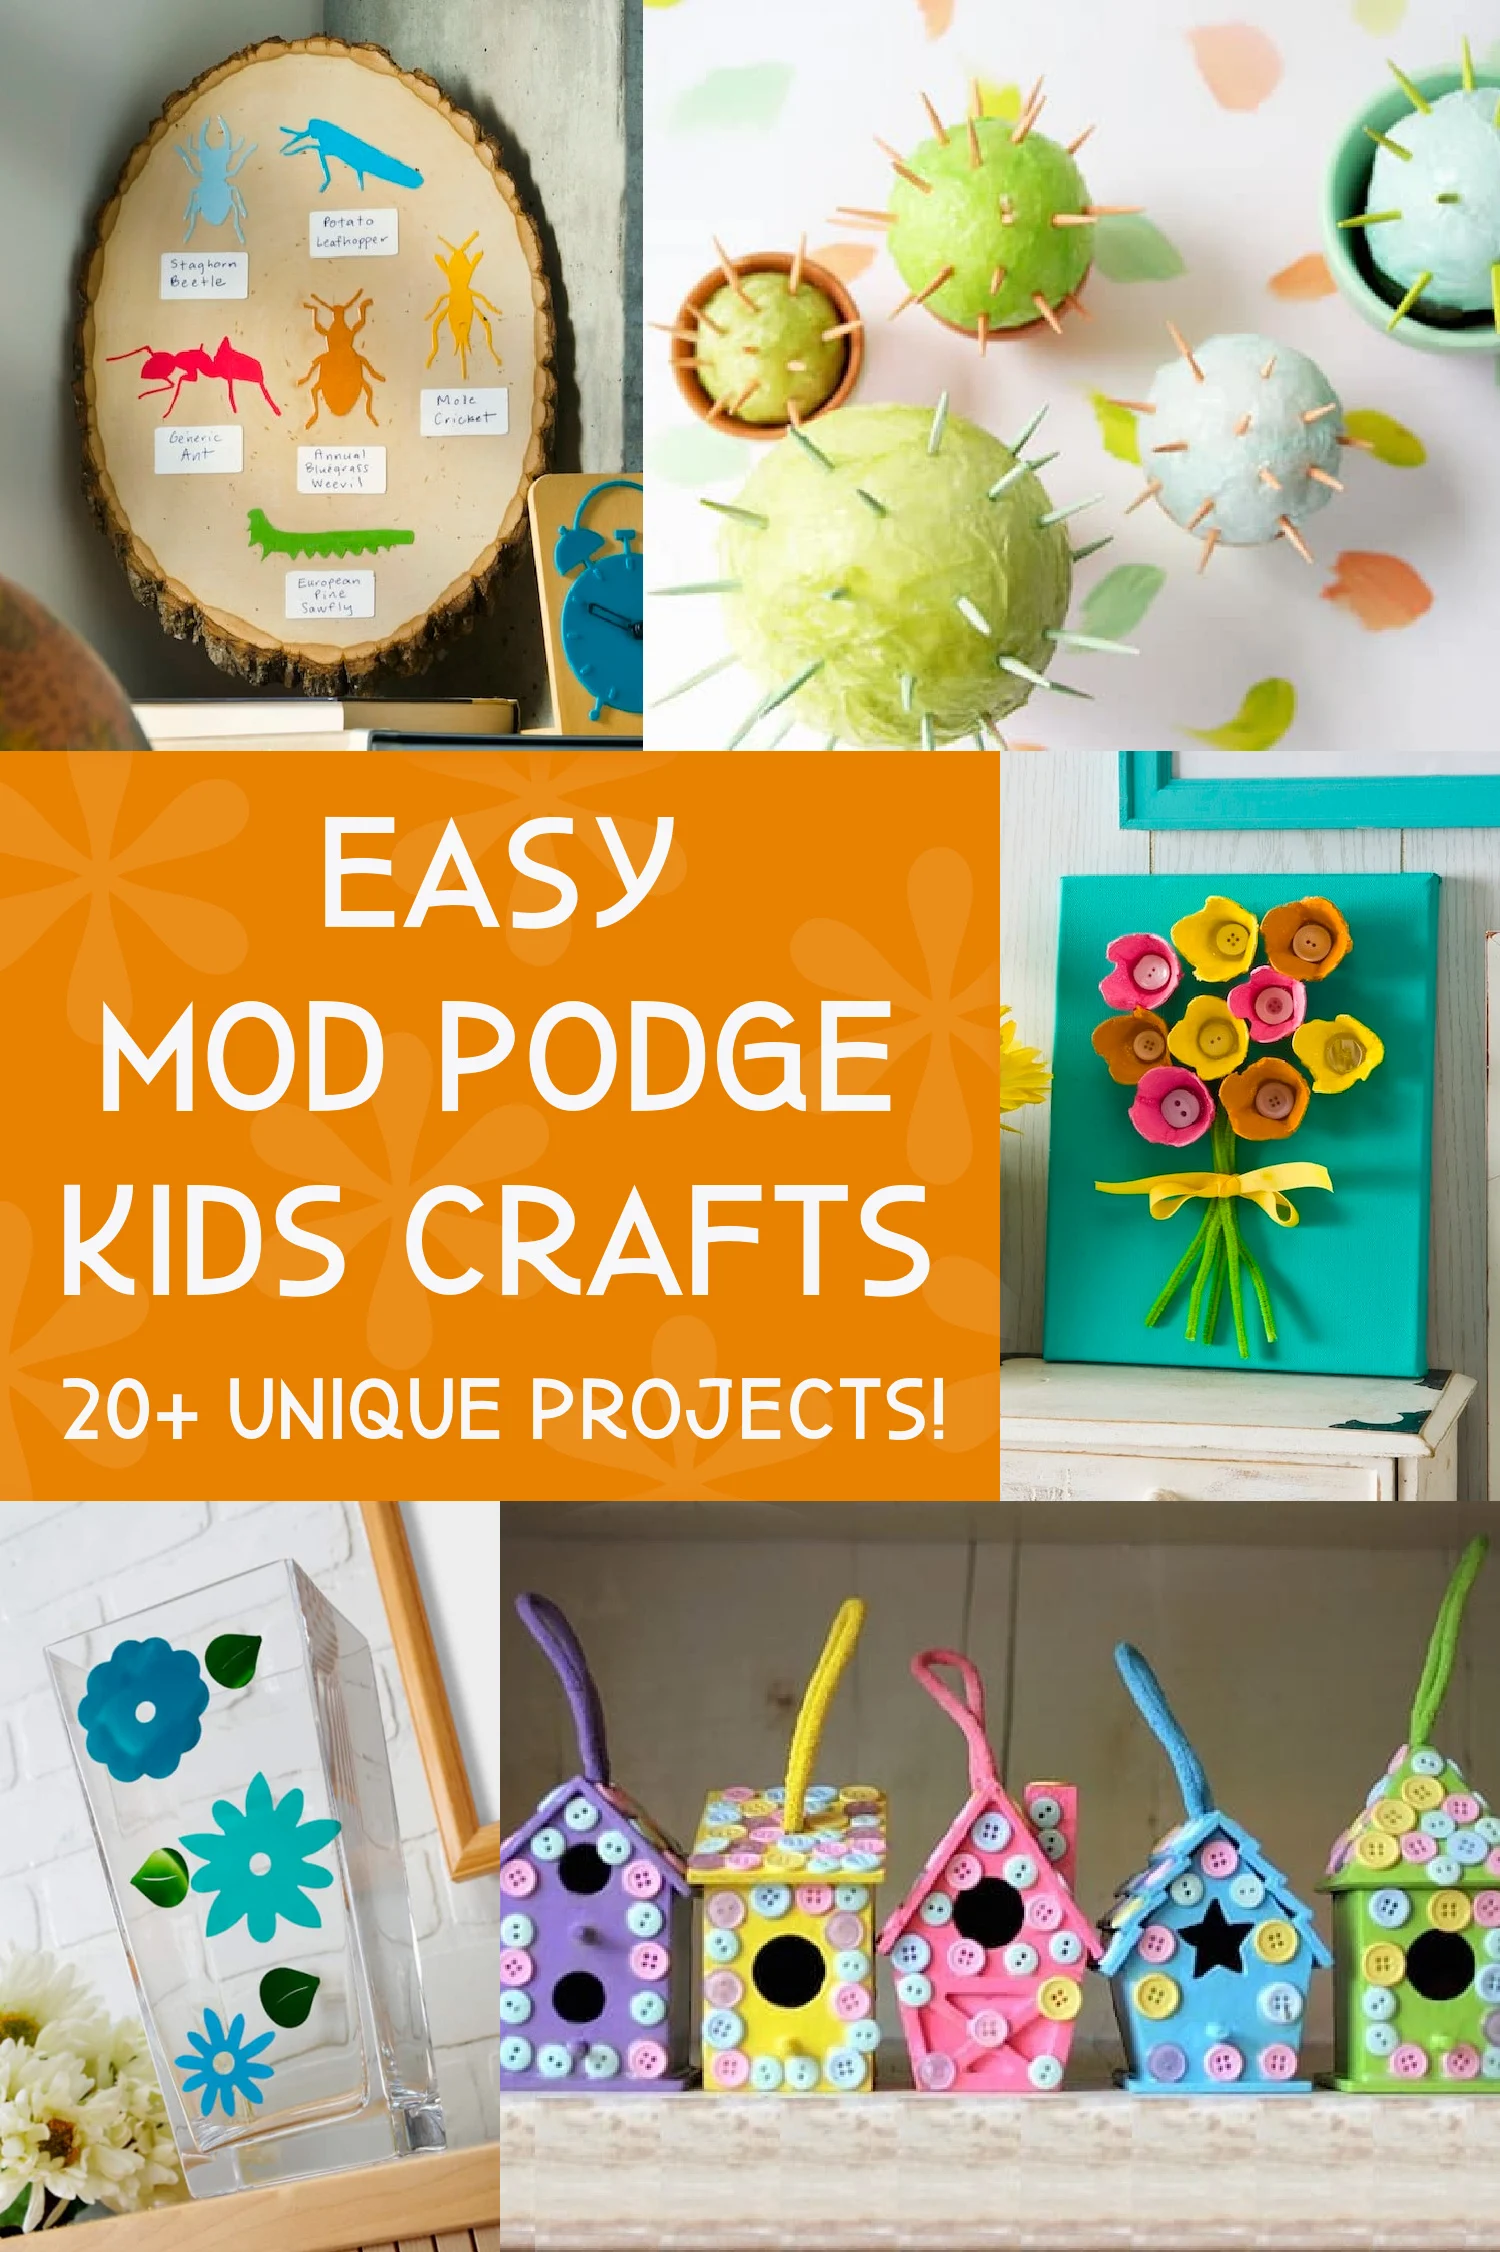 Craft Supplies for Kids: 20 Items for Guaranteed Fun! - Mod Podge